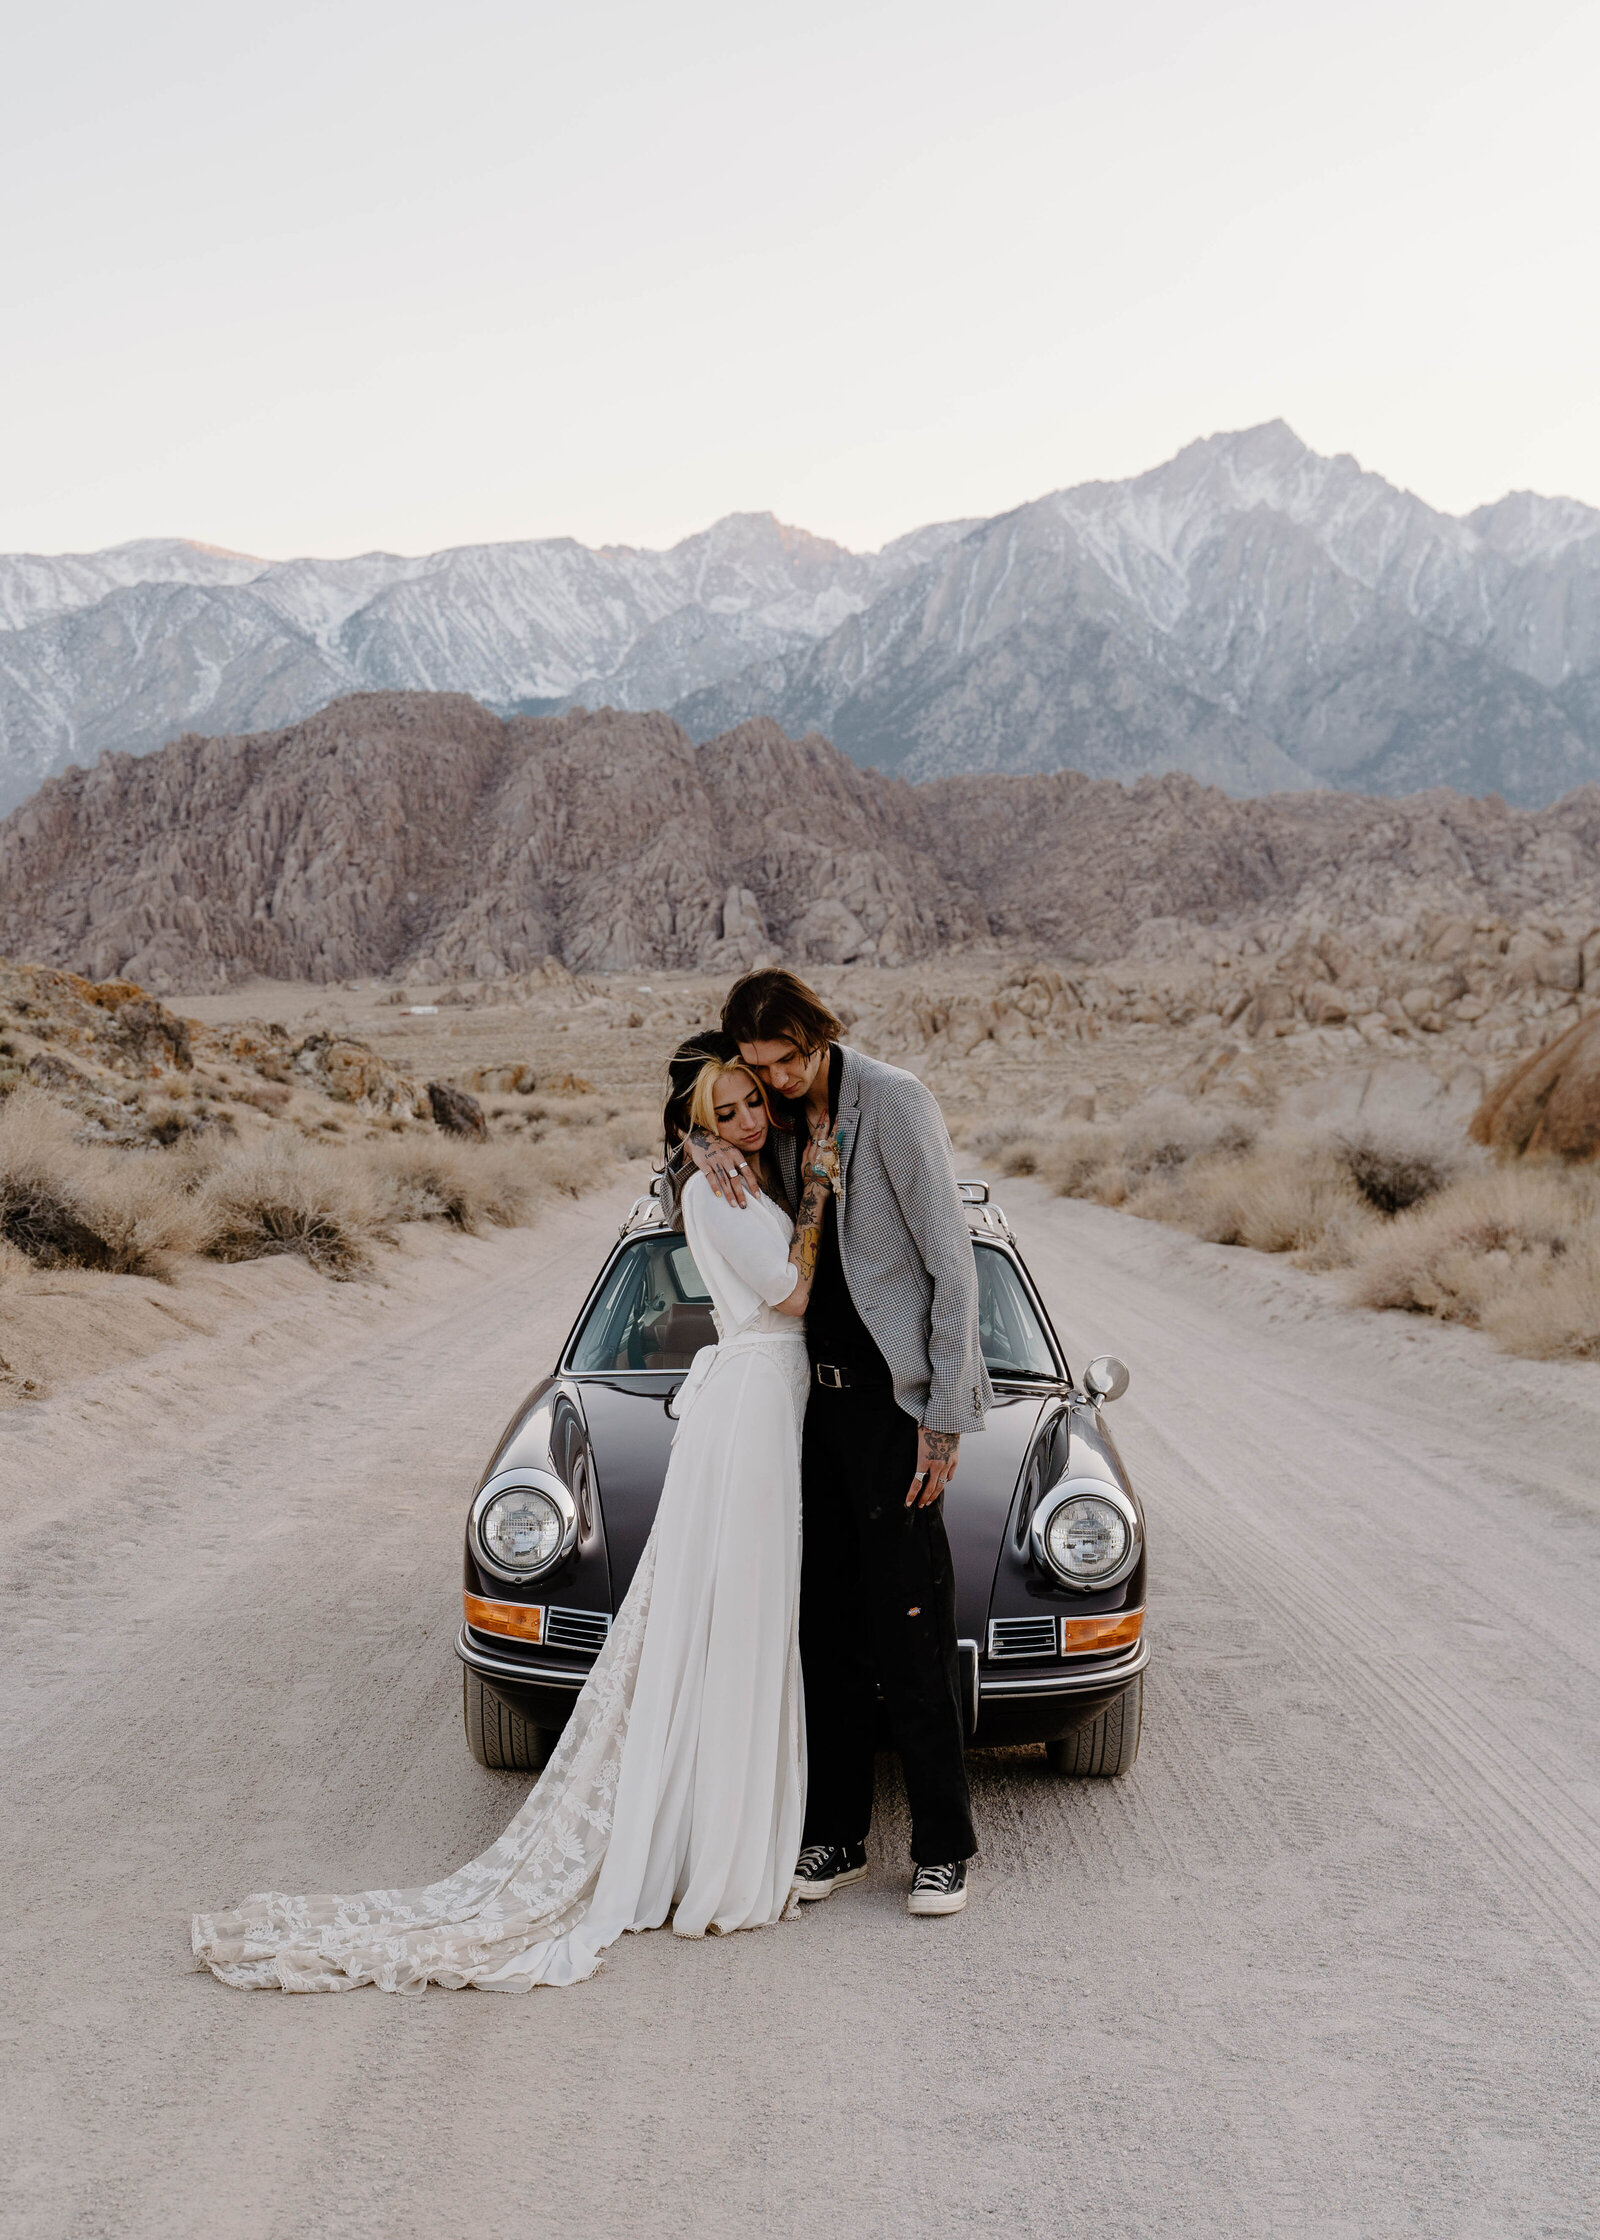 Dreamy sunset elopement photos in Lone Pine, California featuring a young, edgy couple with a vintage porsche car